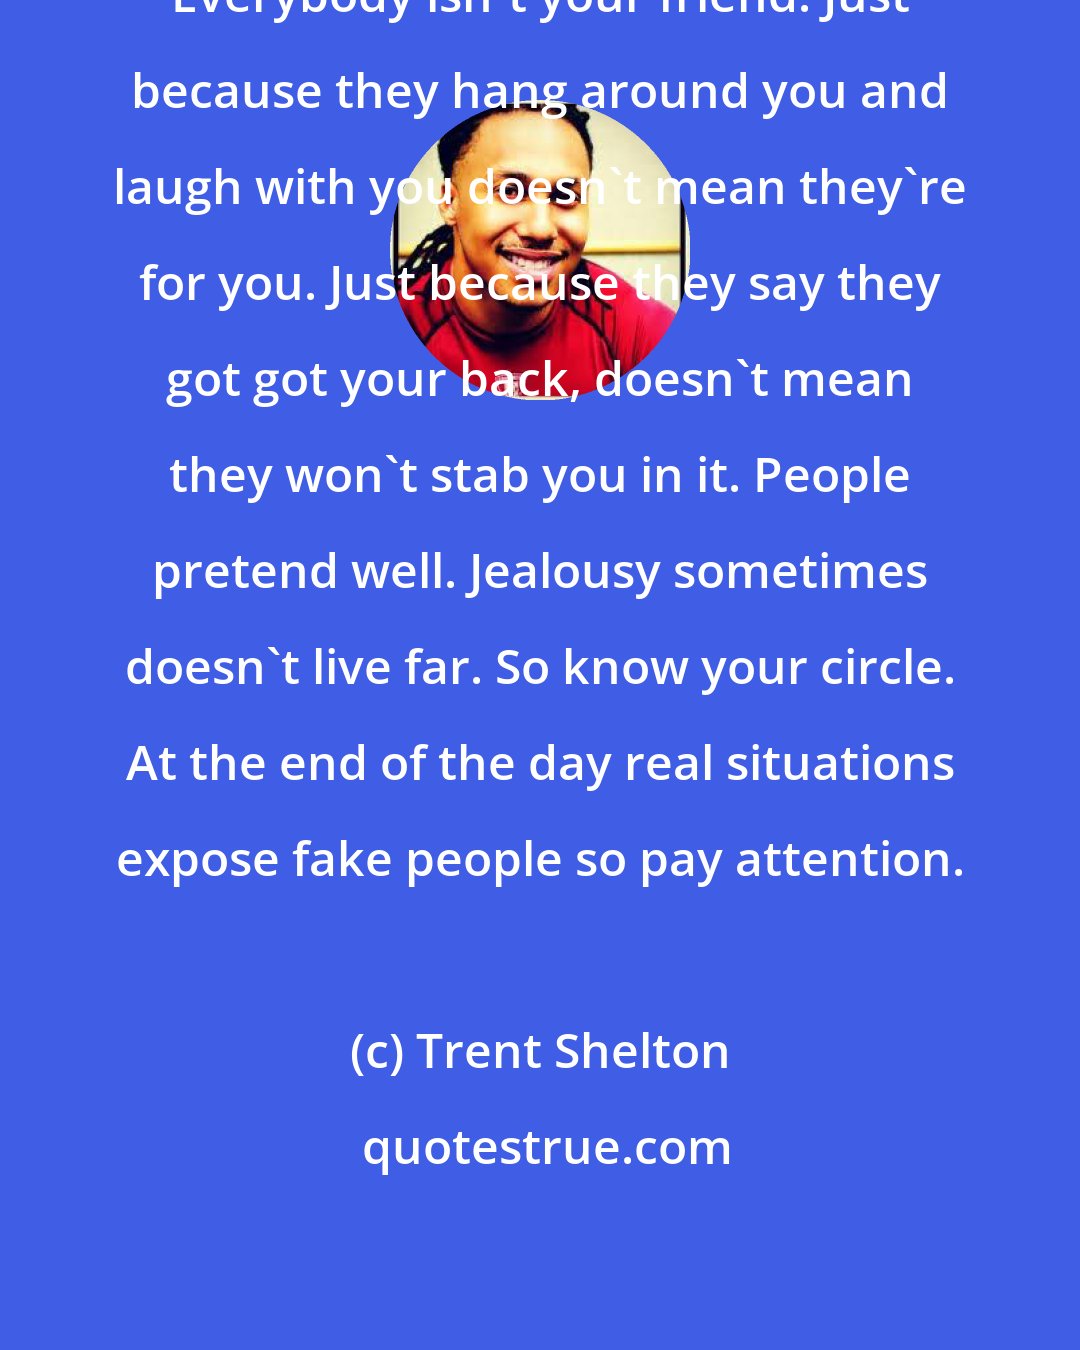 Trent Shelton: Everybody isn't your friend. Just because they hang around you and laugh with you doesn't mean they're for you. Just because they say they got got your back, doesn't mean they won't stab you in it. People pretend well. Jealousy sometimes doesn't live far. So know your circle. At the end of the day real situations expose fake people so pay attention.